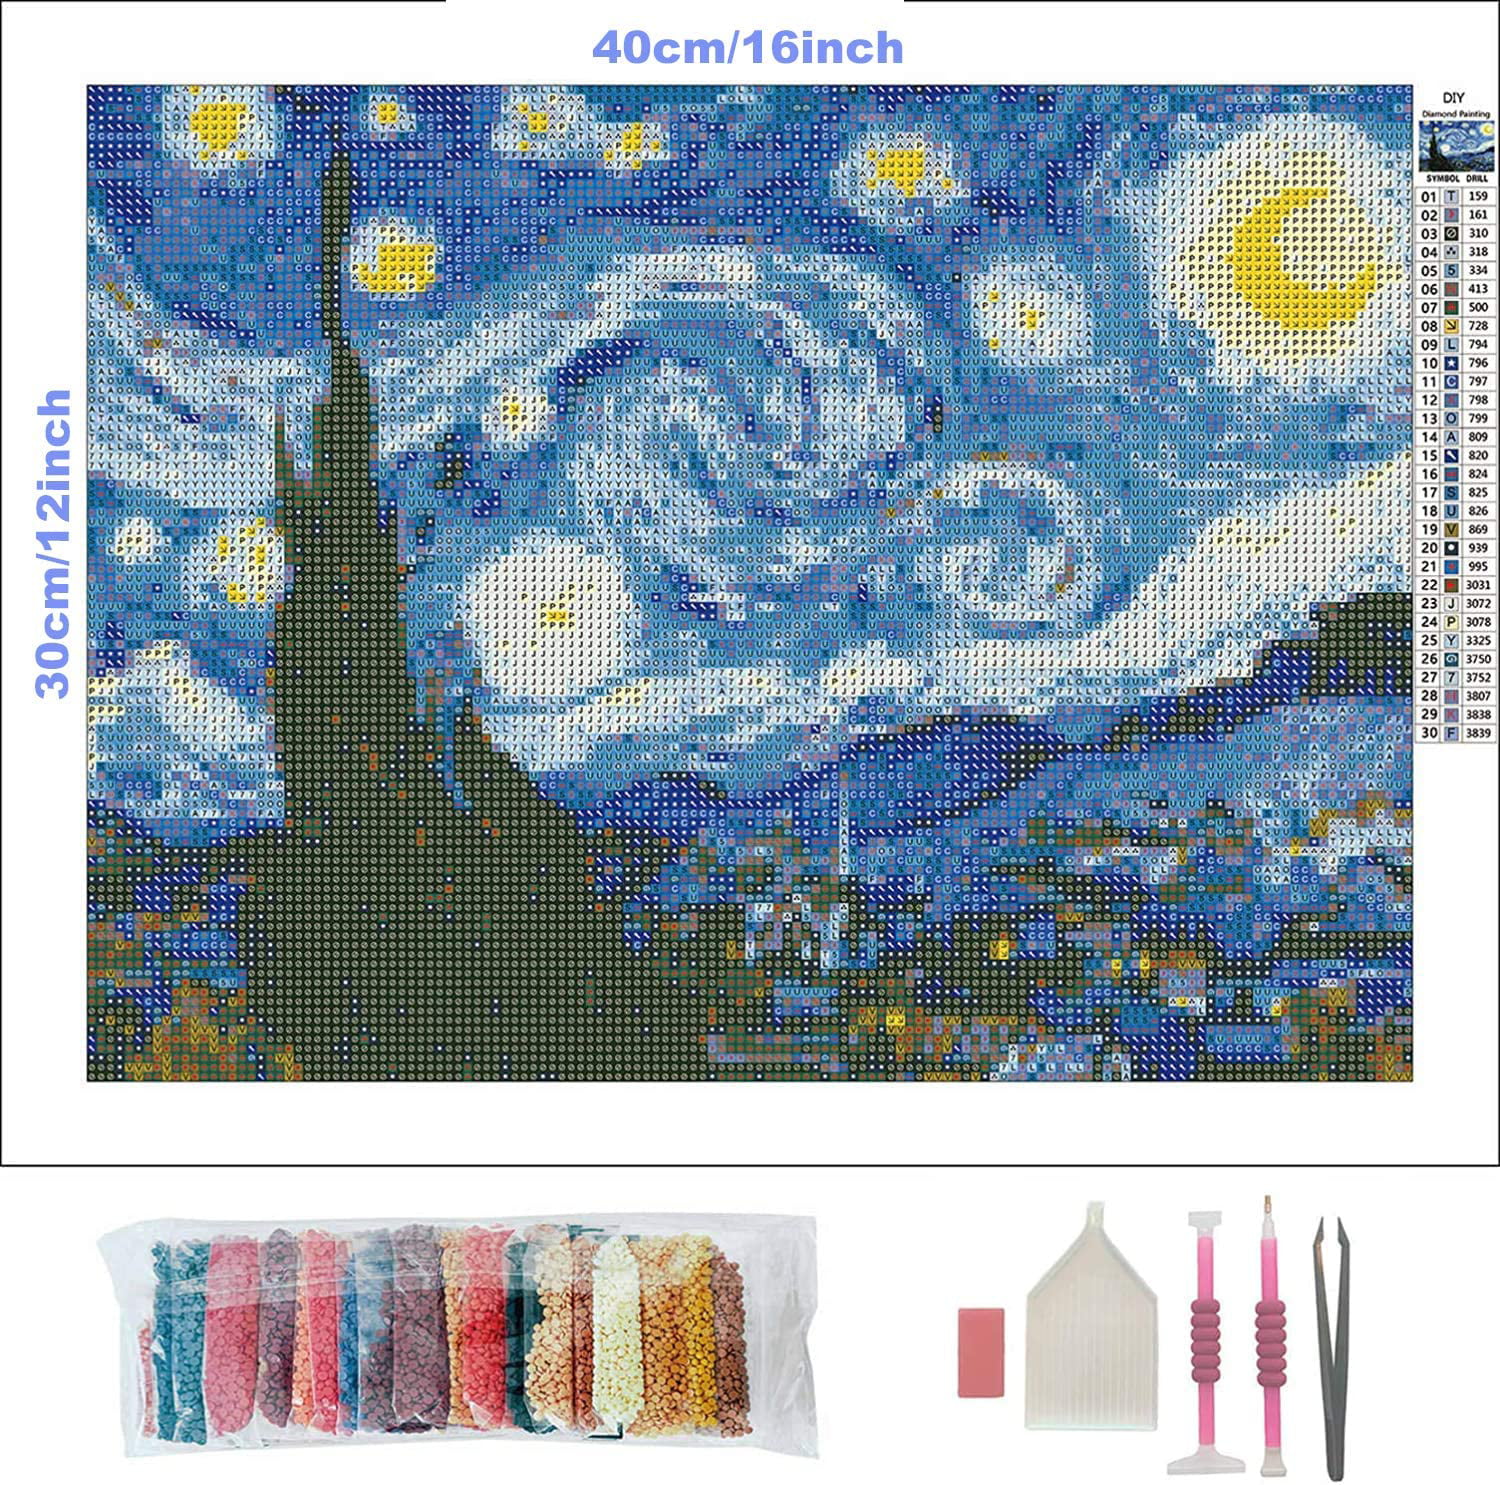 Decor Gift 11.8x15.7 Inches Van Goghs Famous Painting 5D Diamond Painting Kits Full Drill Rhinestone Painting By Number DIY Cross Stitch Embroidery Craft for Adults Starry Night 